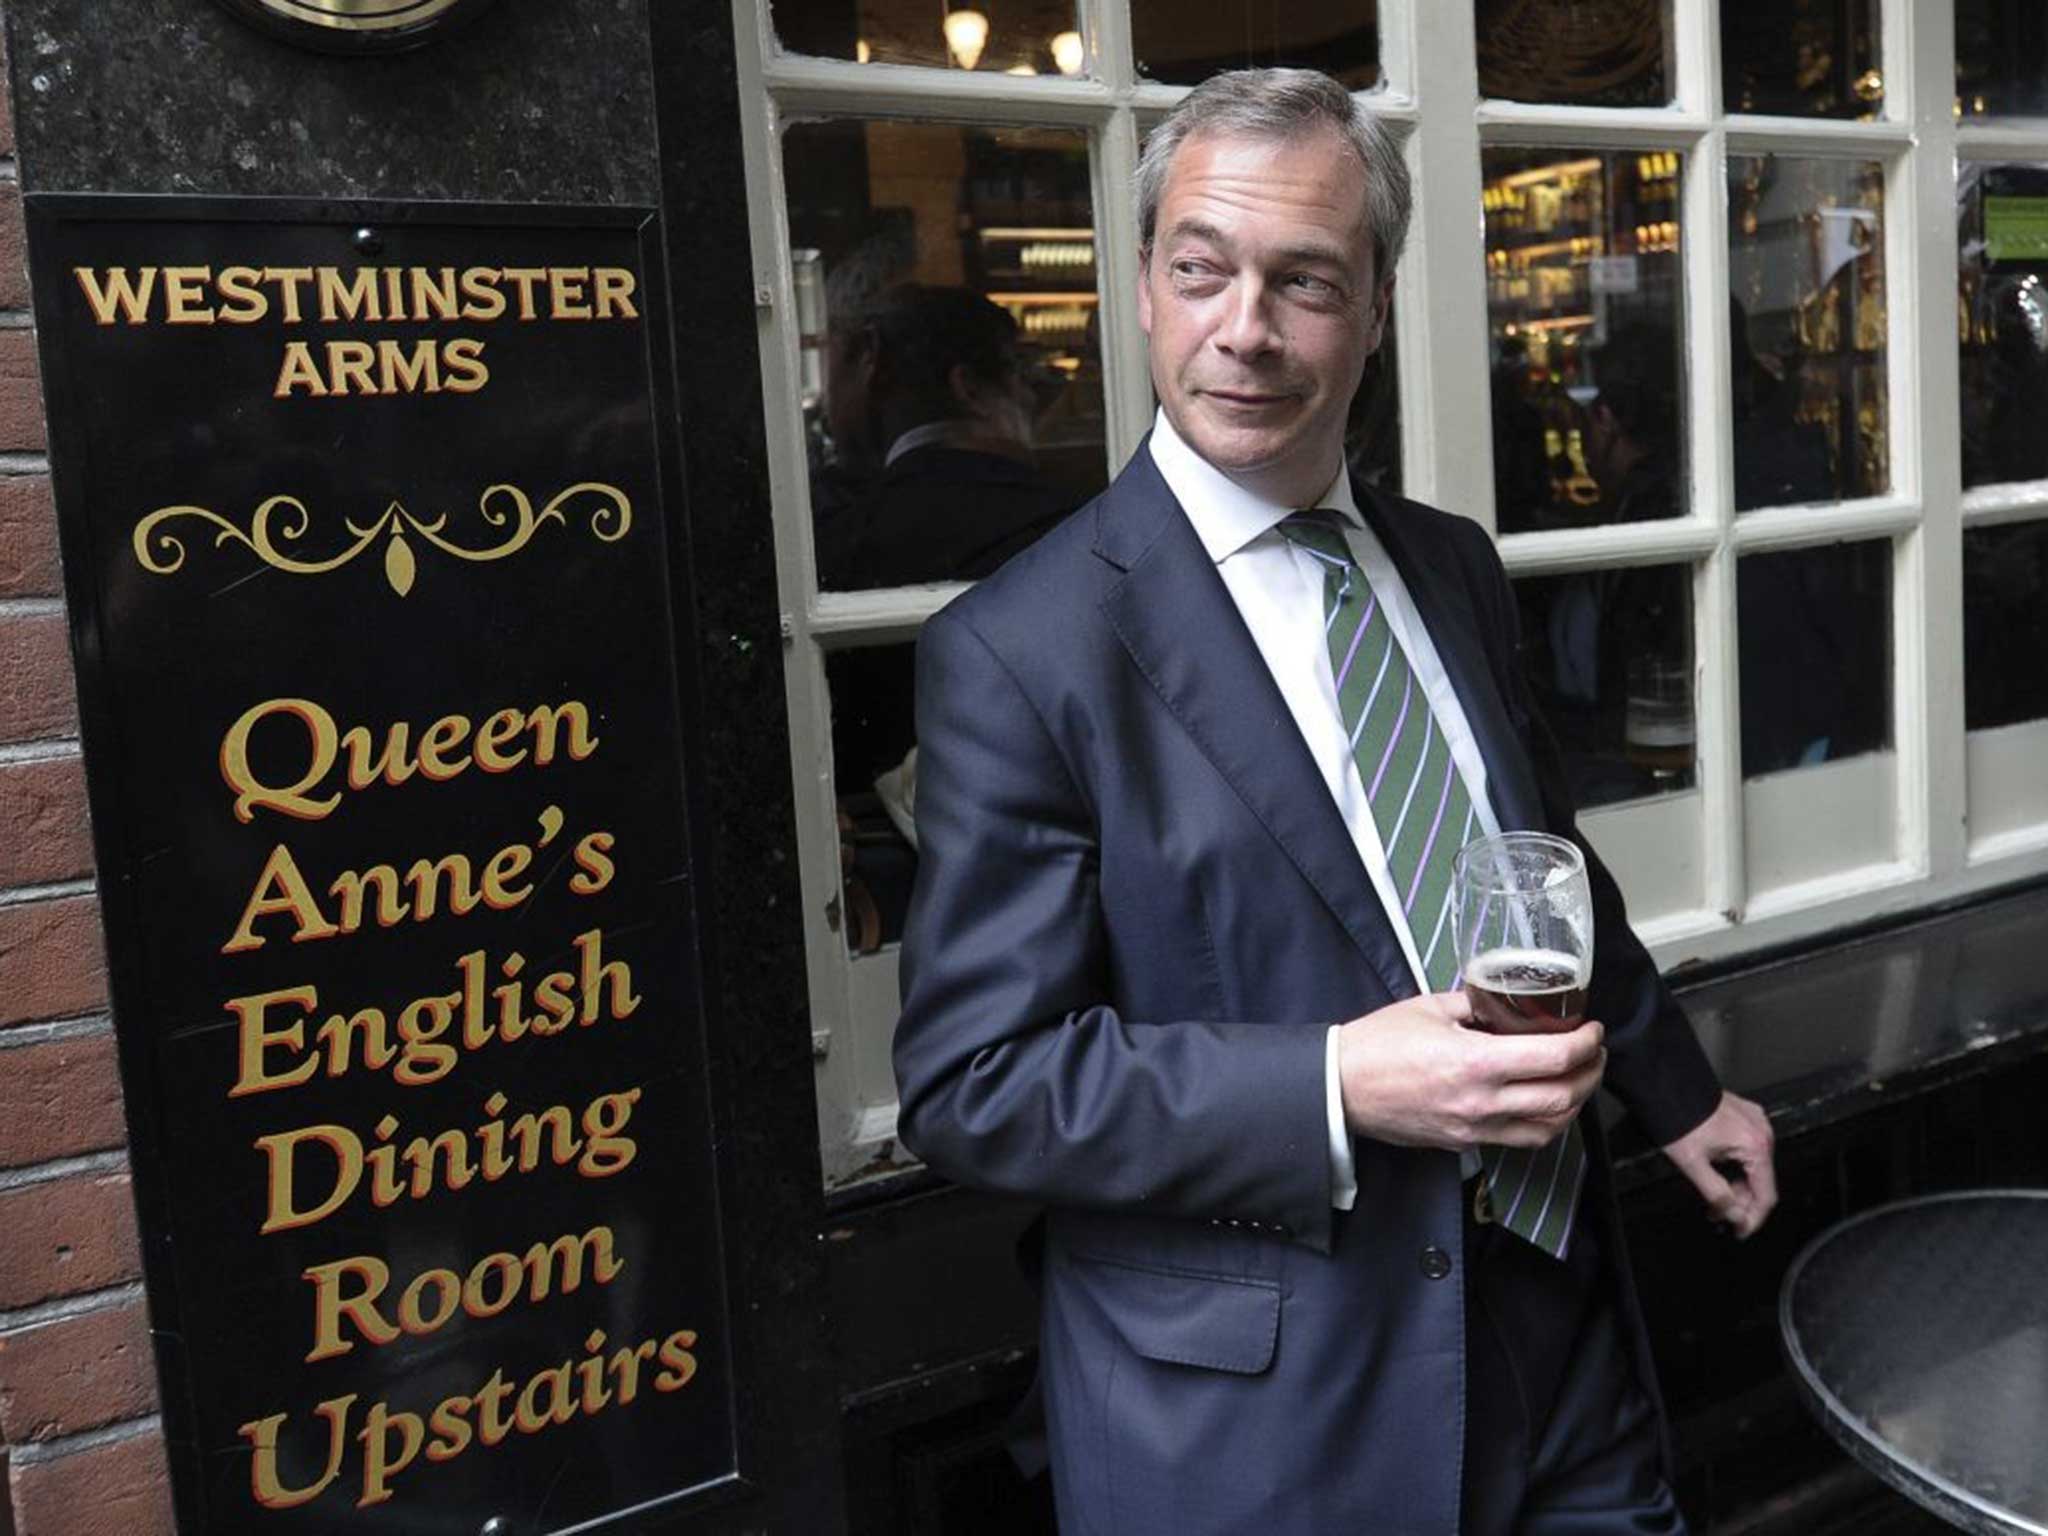 Nigel Farage outside the Westminster Arms